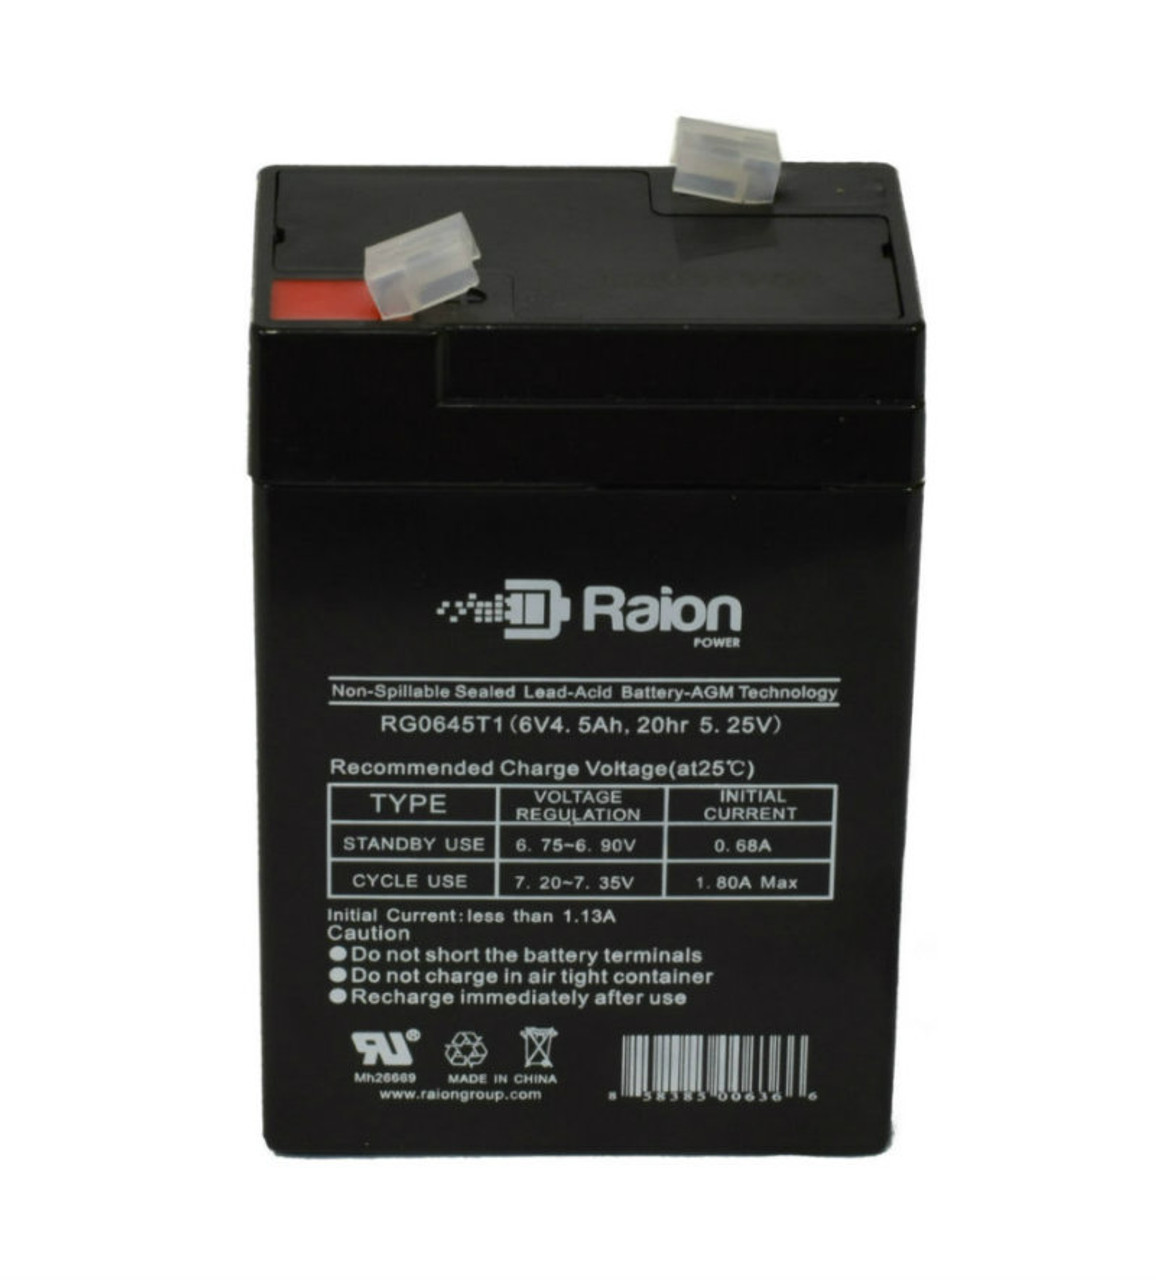 Raion Power RG0645T1 Replacement Battery Cartridge for KAGE MF6V5Ah